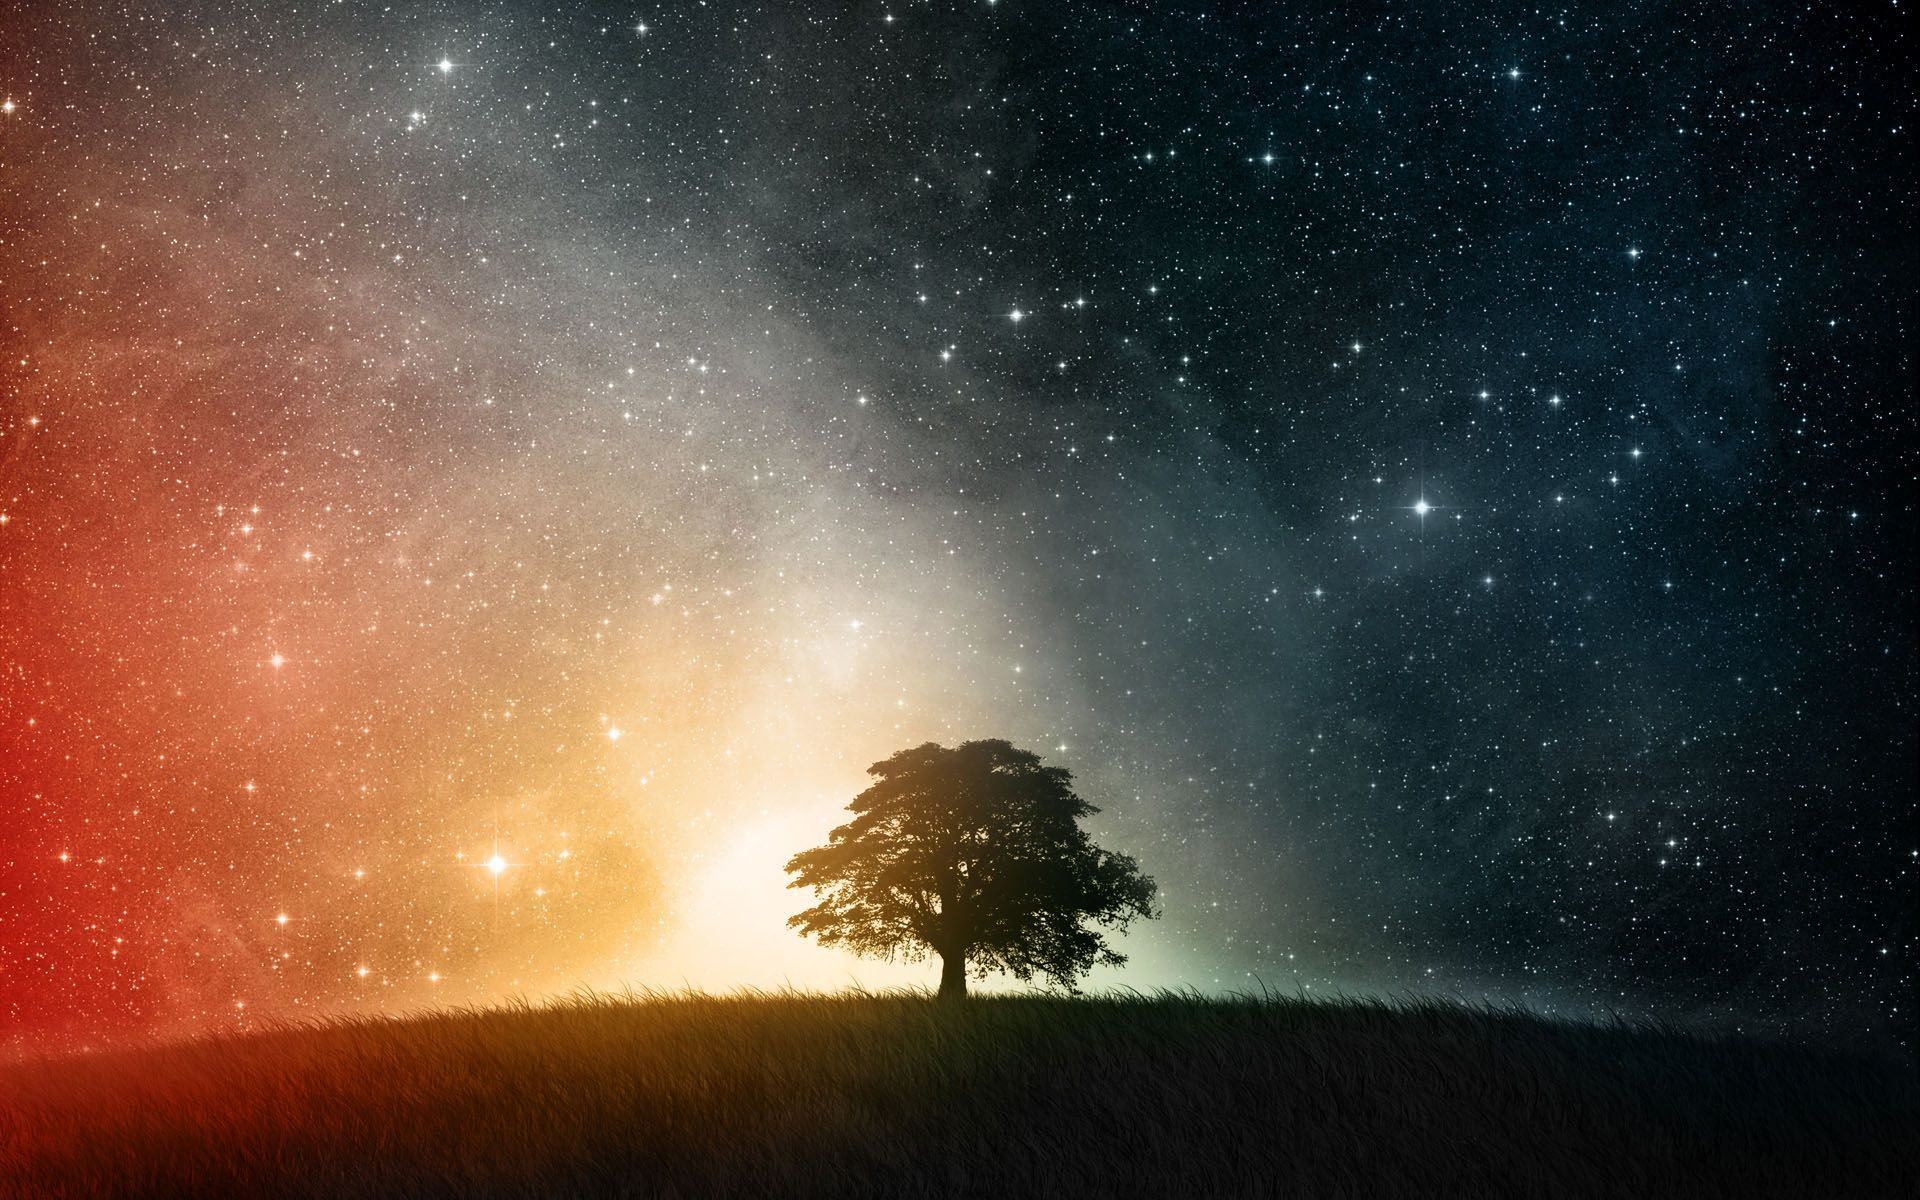 1920x1200 Download Awesome Pc Wallpaper  - Full HD Wall Â· Beautiful Tree  Shadow on Starry Sky -  - Full HD 16/10 .